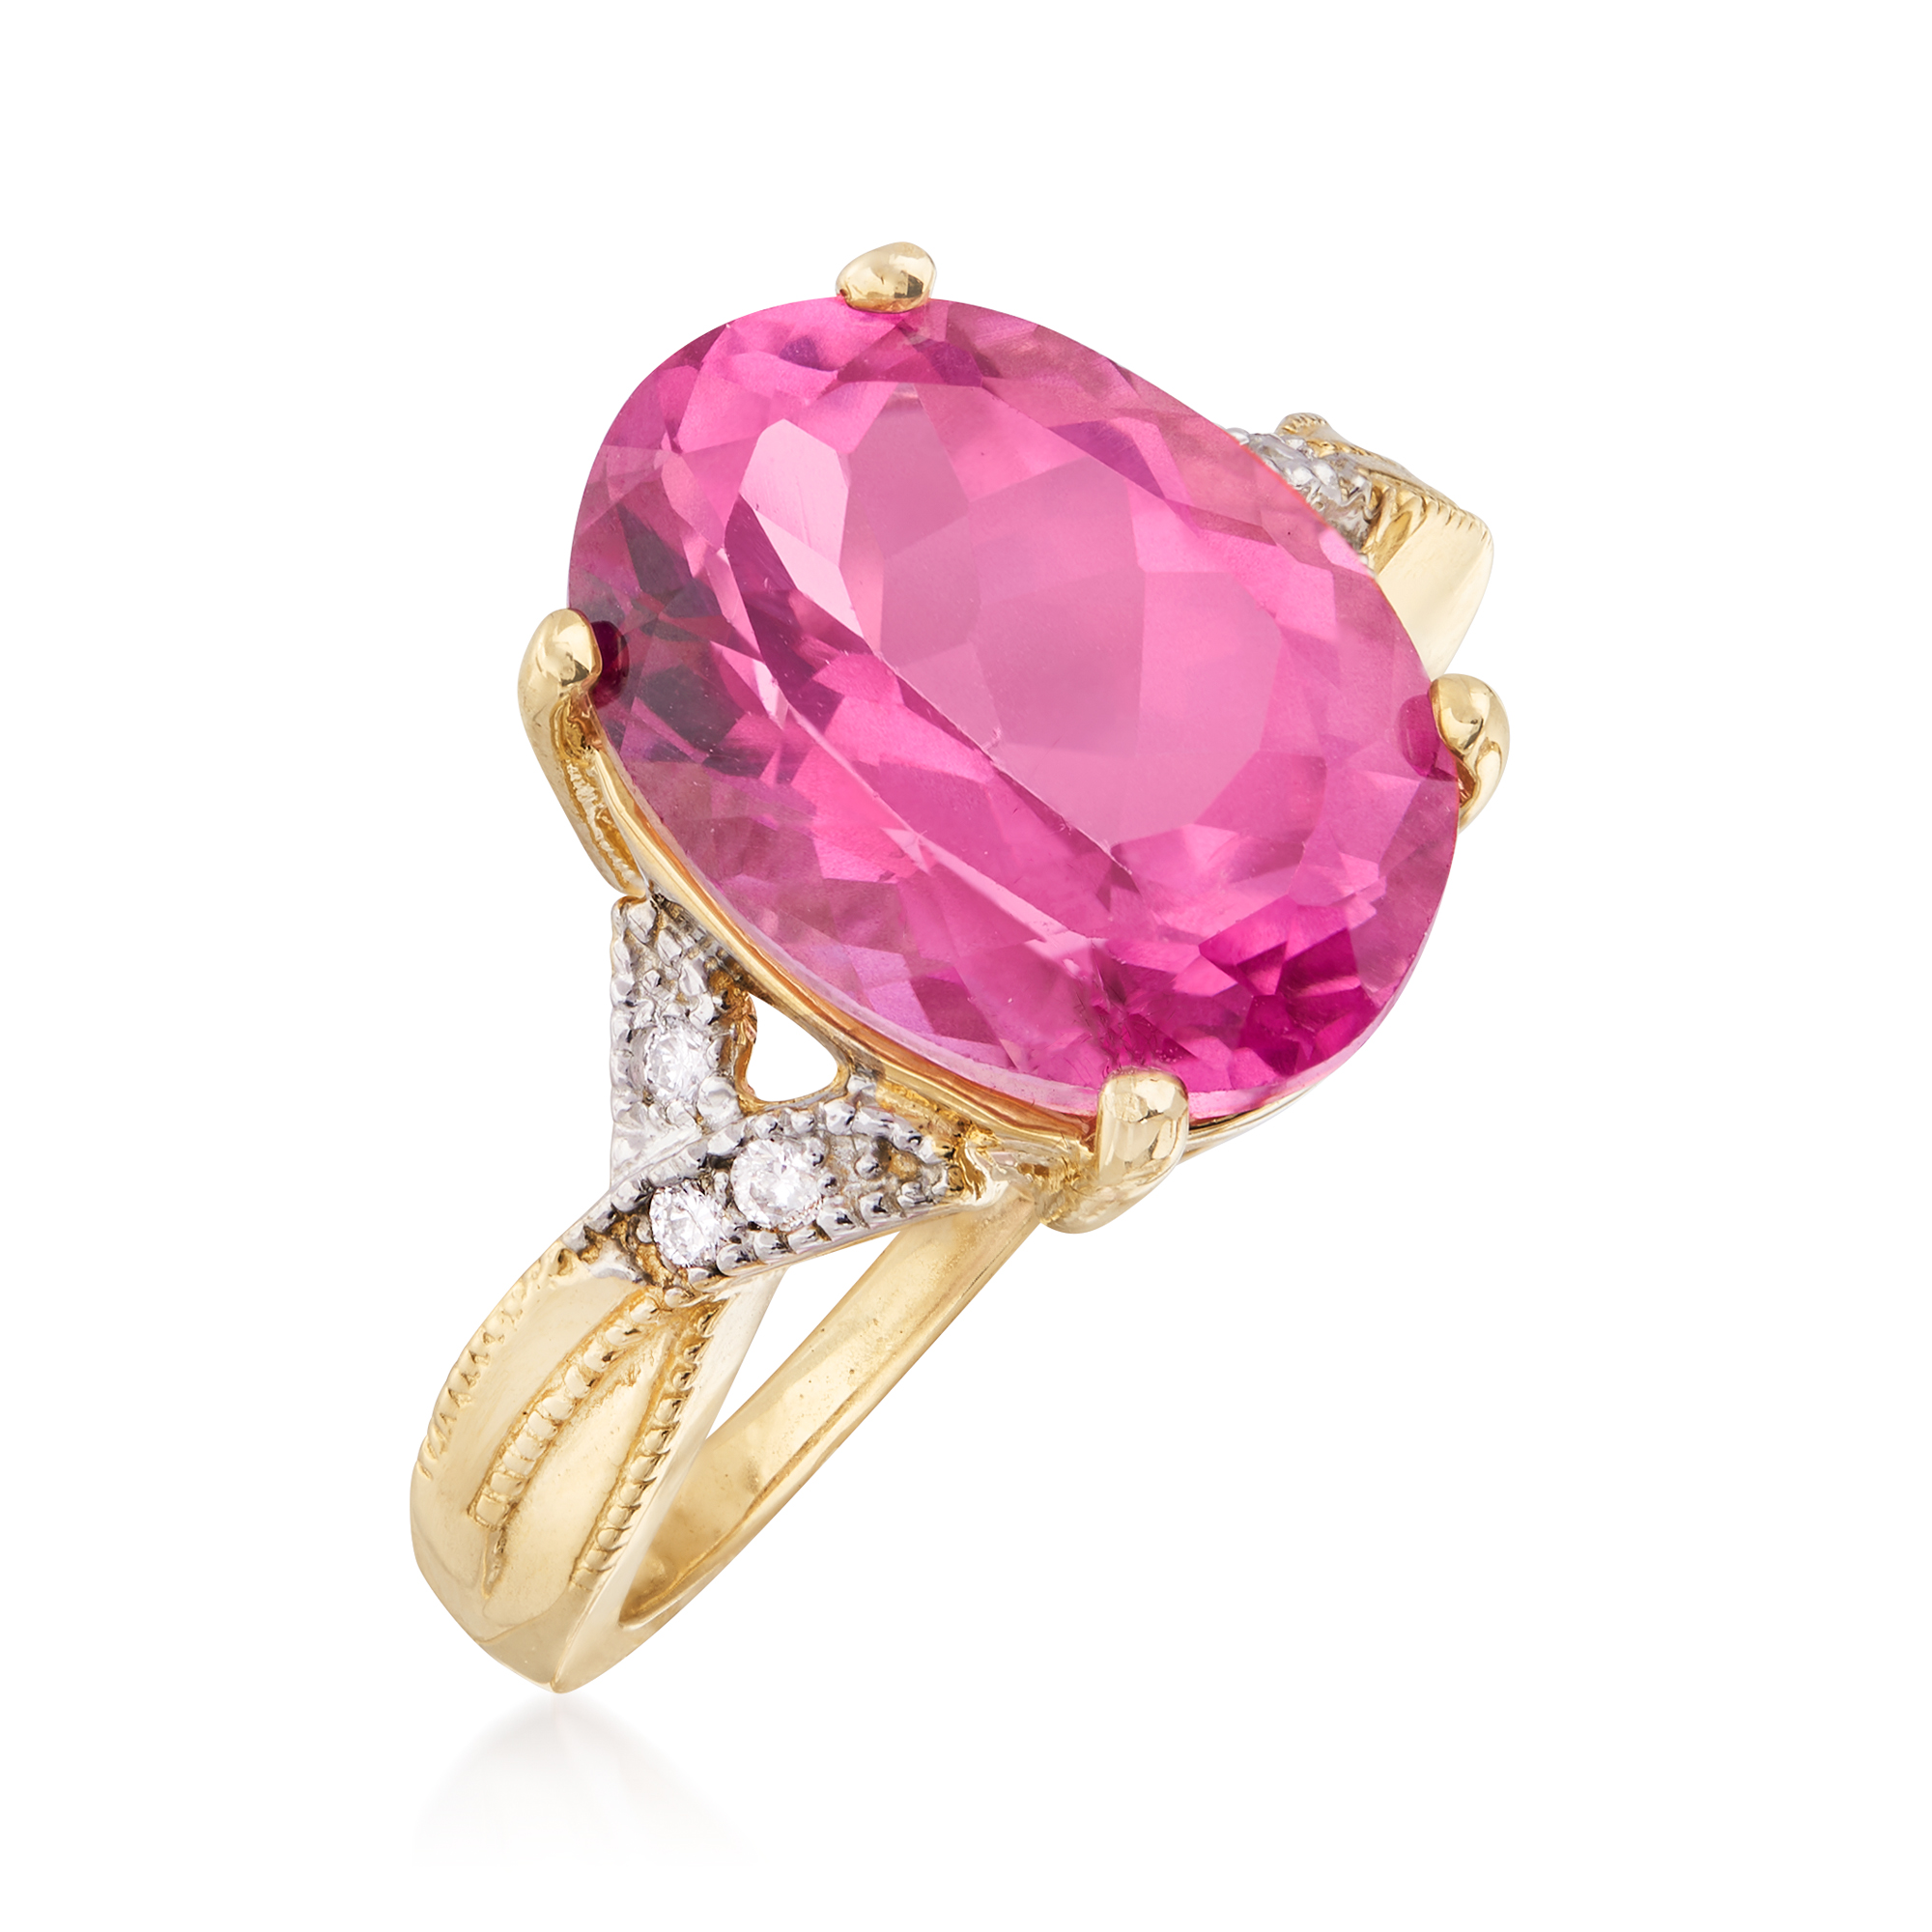 7.00 Carat Pink Topaz Ring with Diamond Accents in 14kt Yellow Gold ...